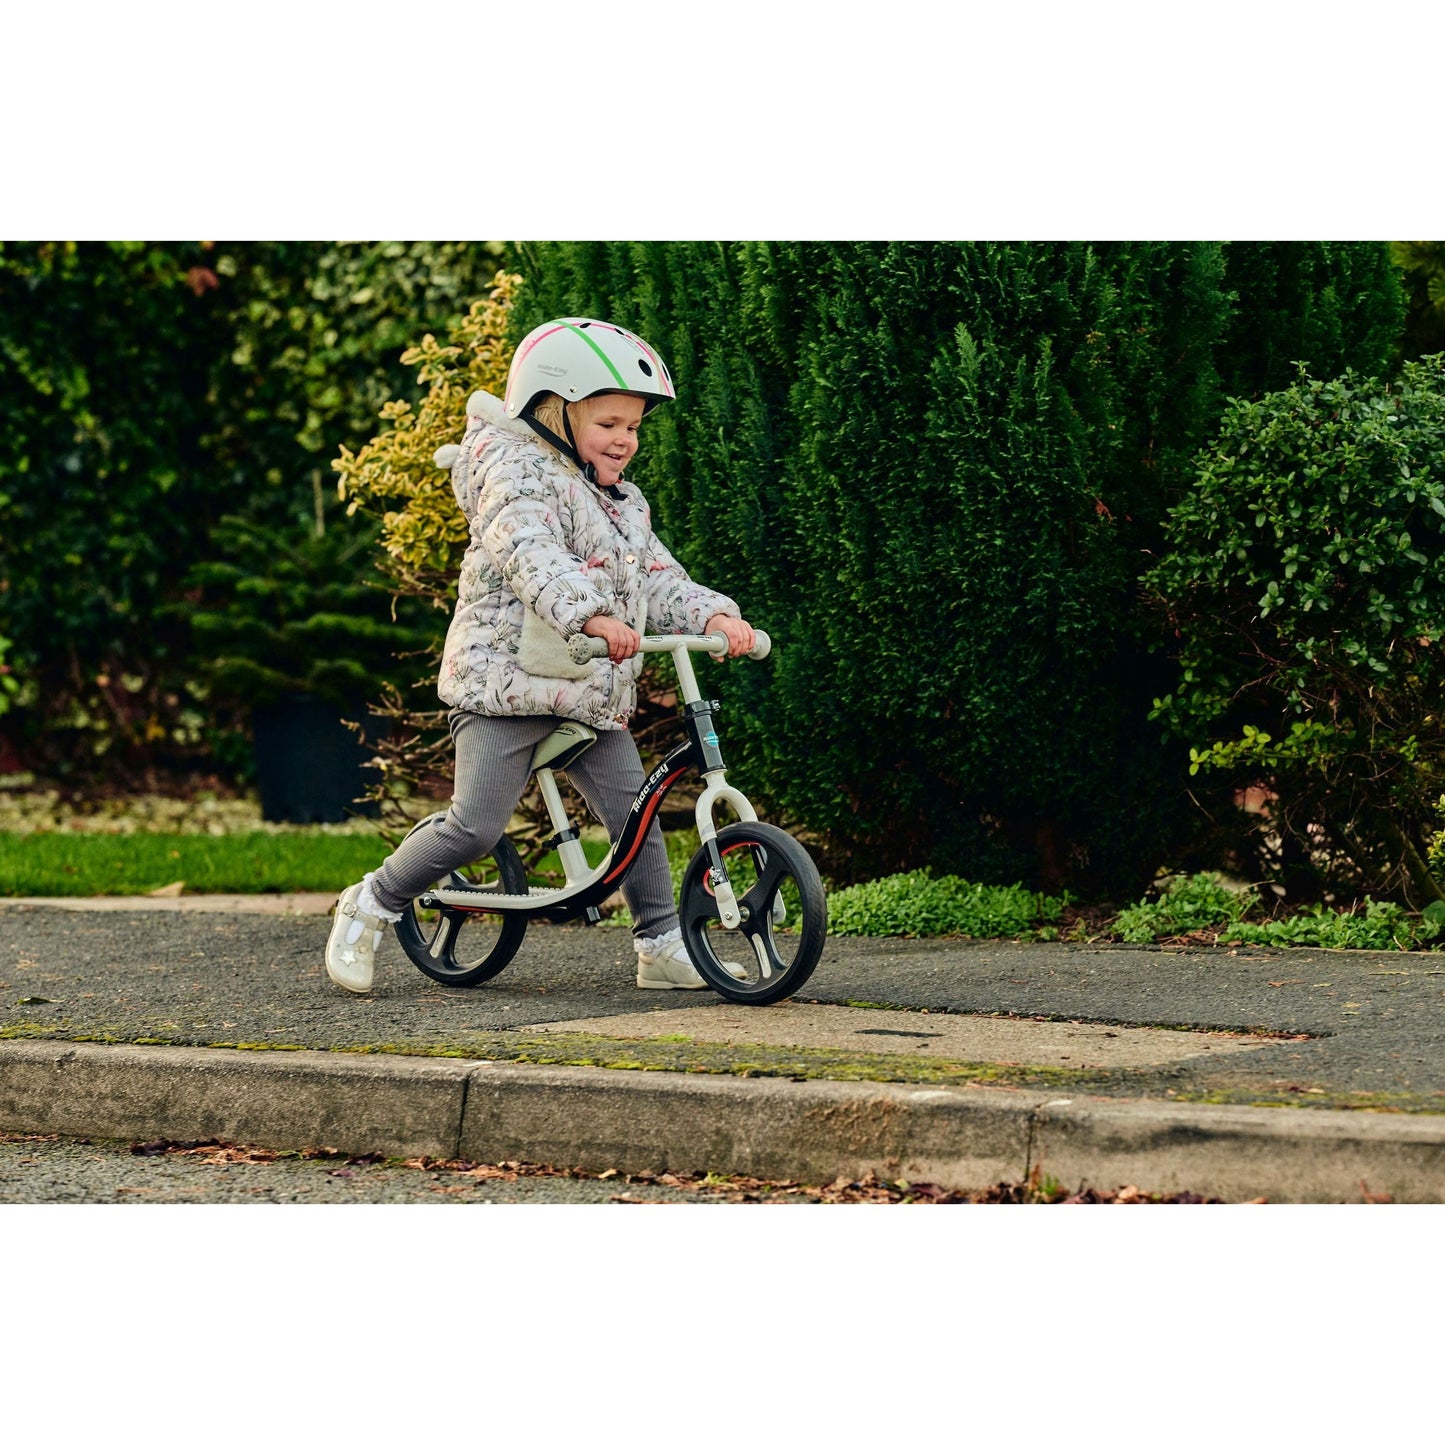 girl wearing Ride-Ezy Hector 54-57cms Kids Helmet - White and riding ride-ezy go glo balance bike on pavement